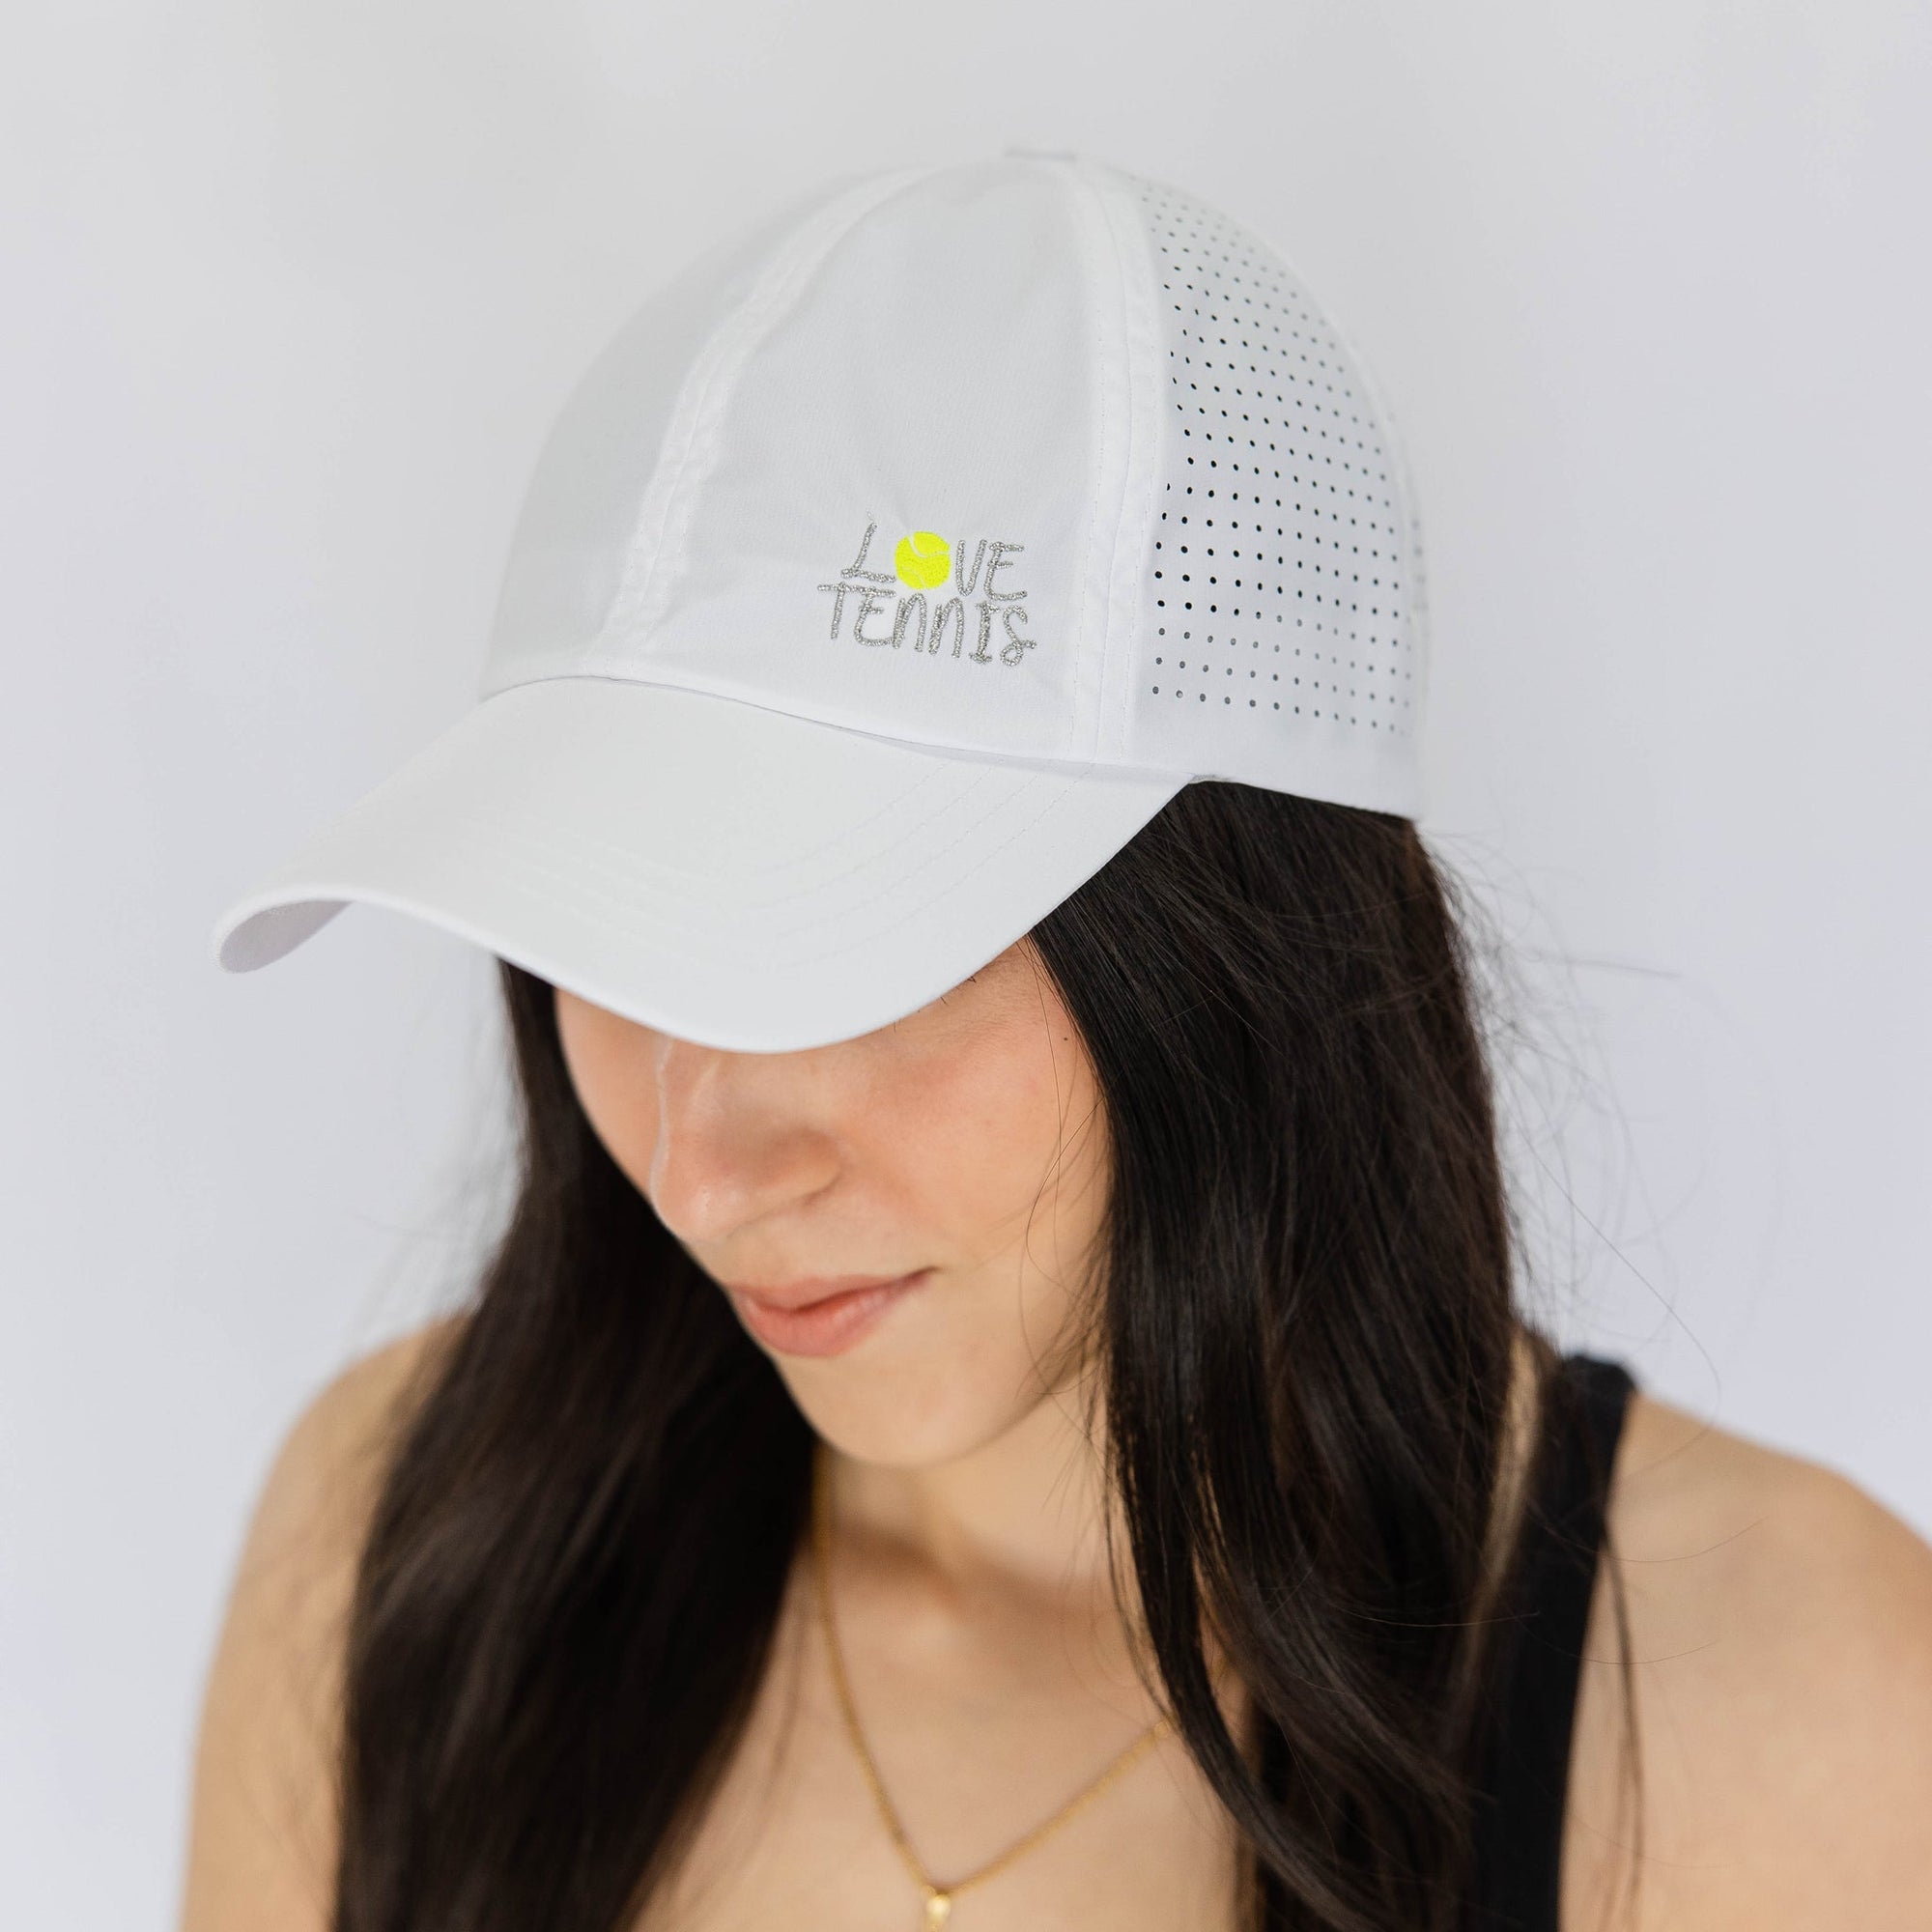 LOVE TENNIS TUCK-IN STRAP HAT- WHITE - Molly's! A Chic and Unique Boutique 